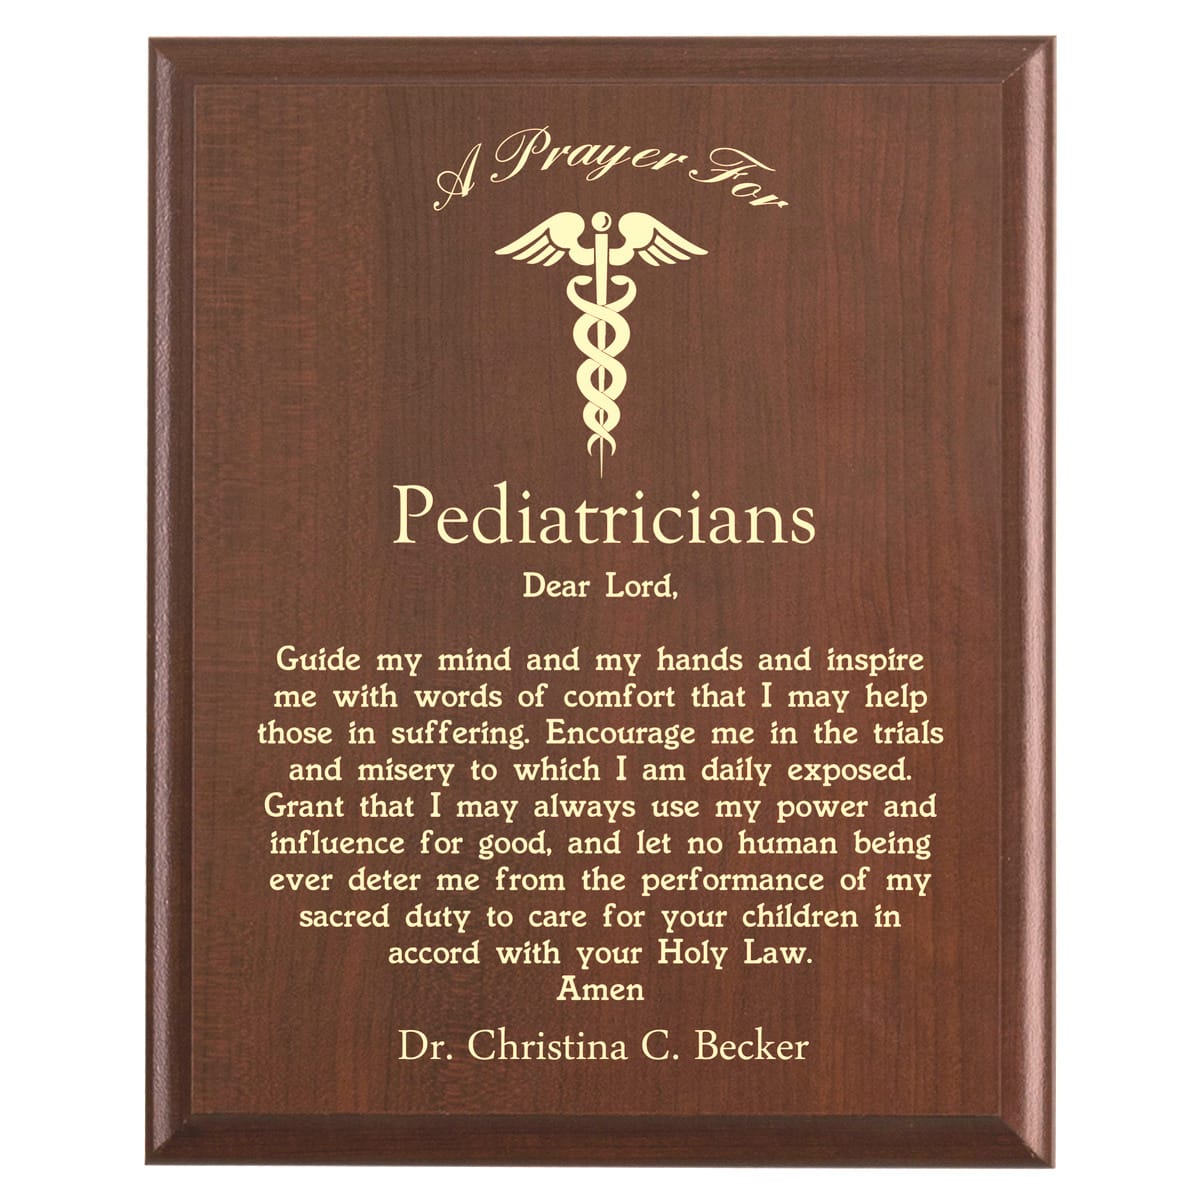 Plaque photo: Pediatricians Prayer Plaque design with free personalization. Wood style finish with customized text.